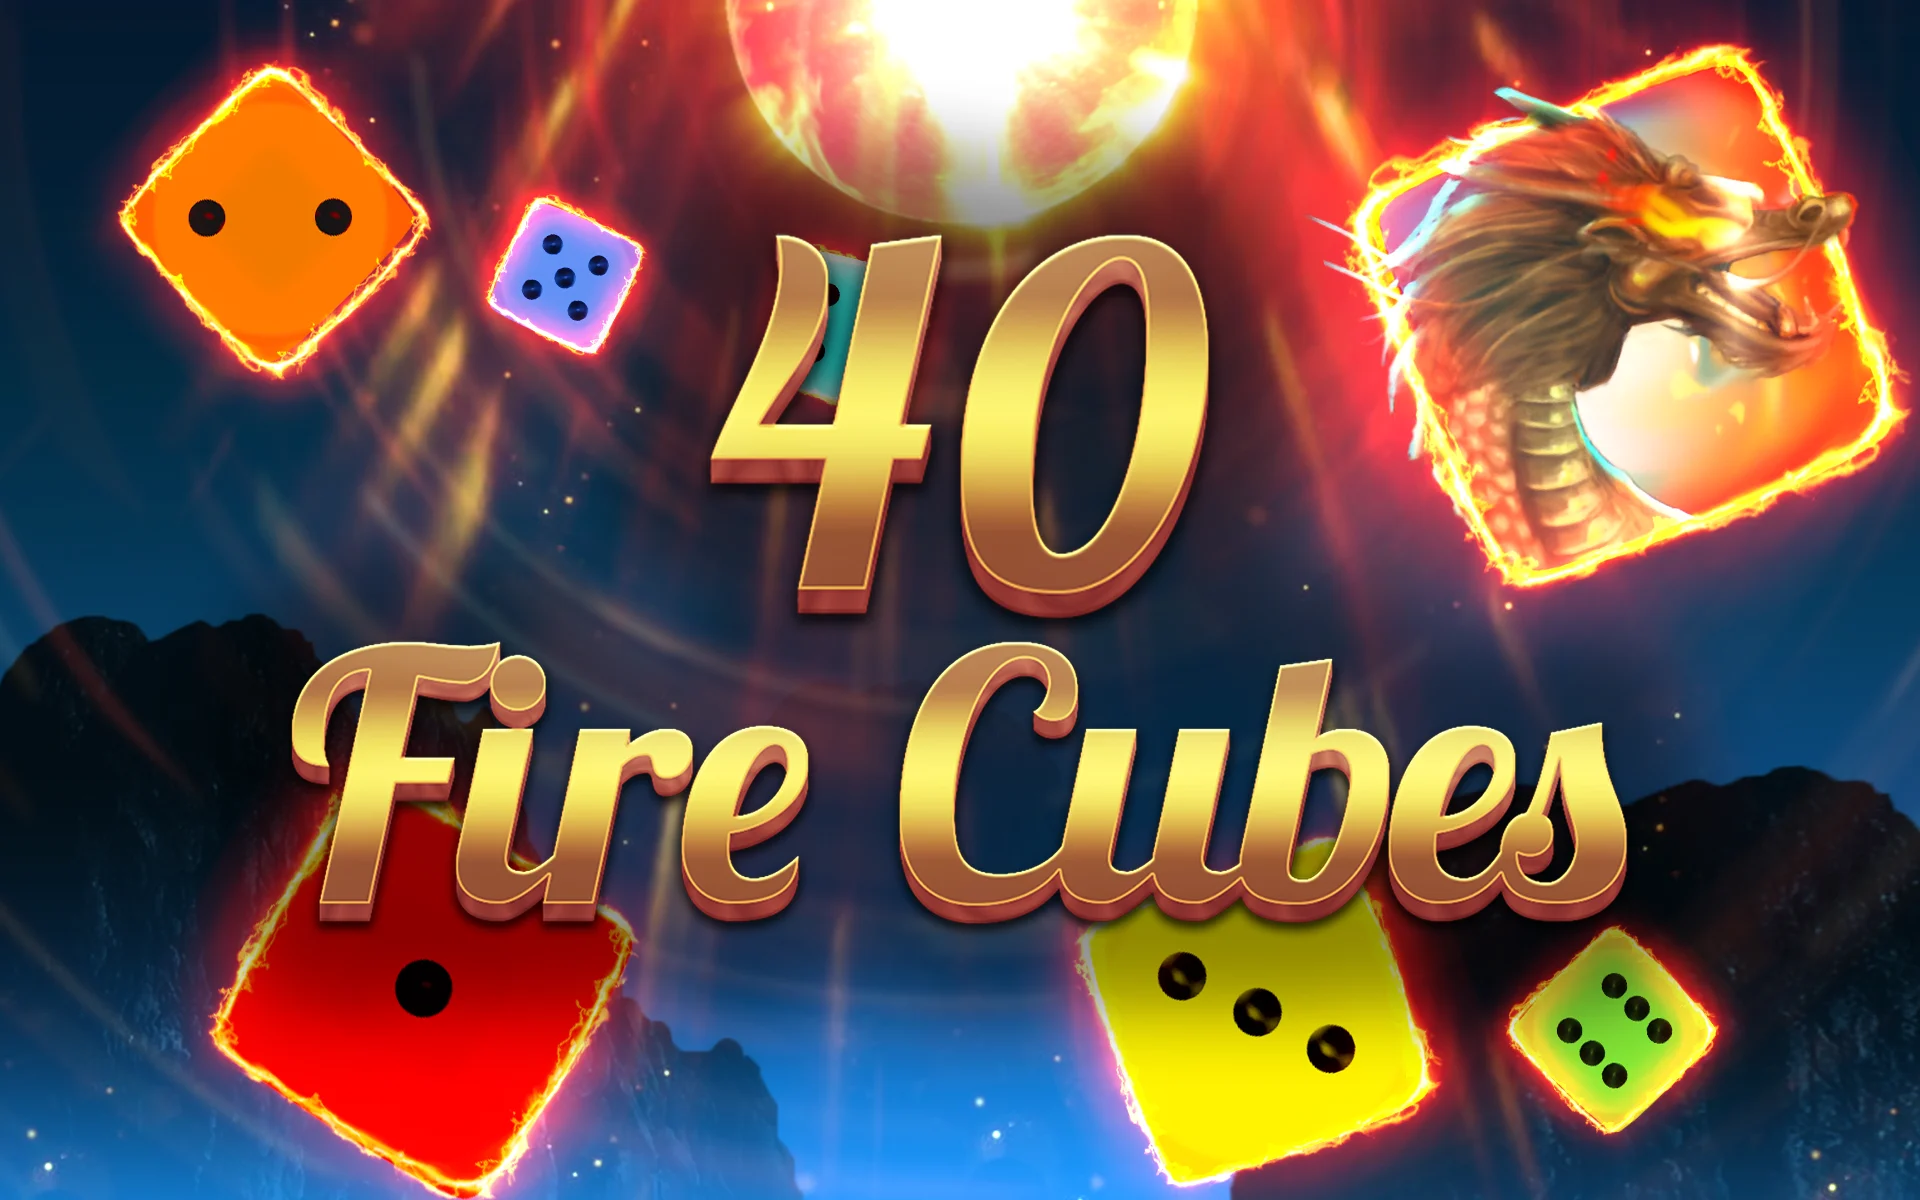 Play 40 Fire Cubes on Starcasino.be online casino